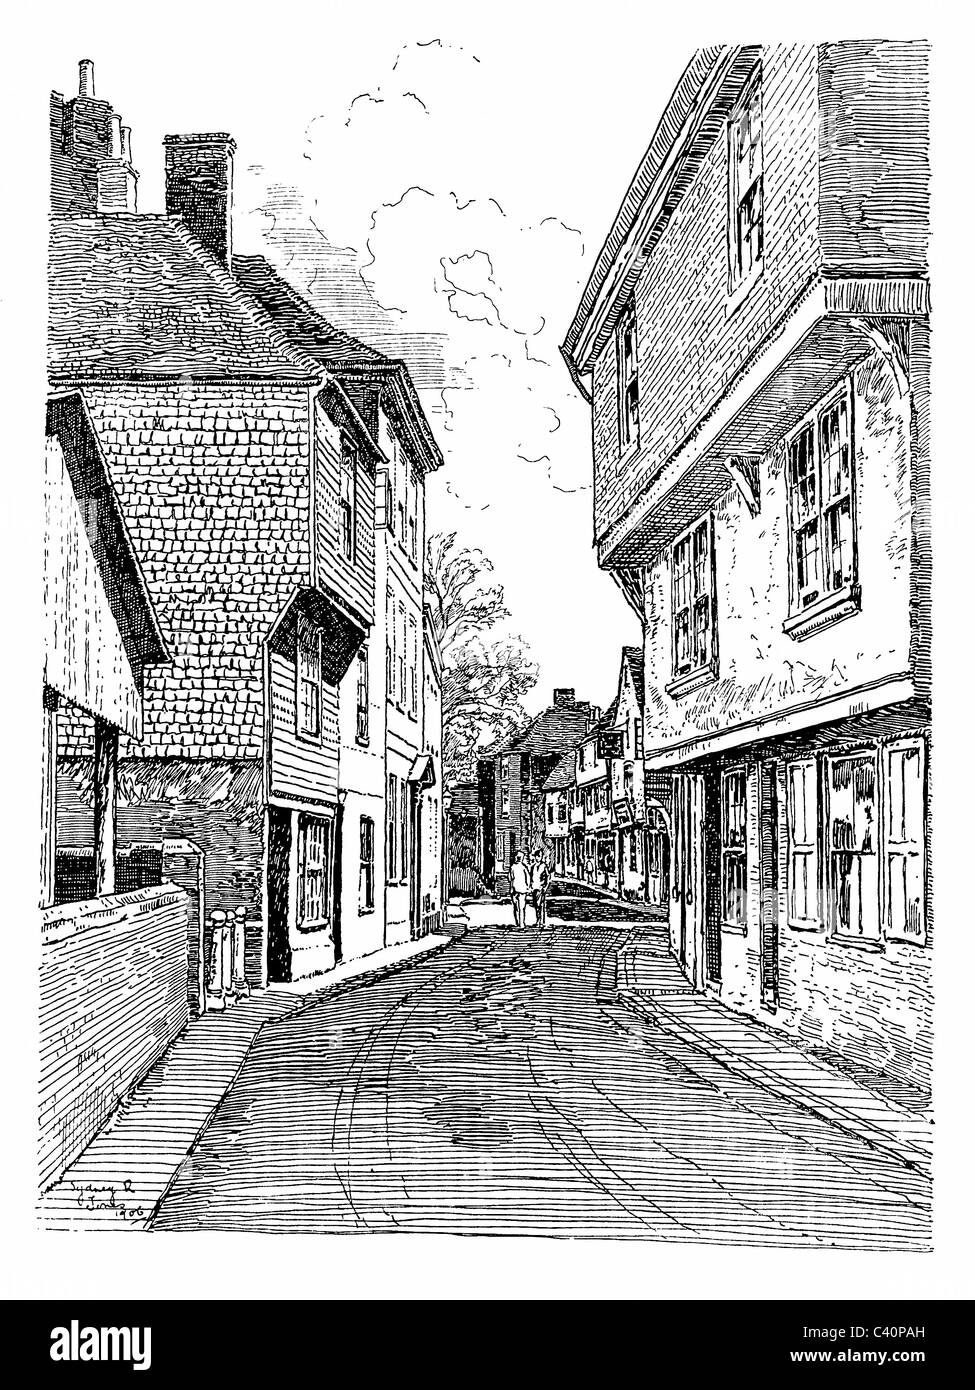 Sandwich, Kent - pen and ink illustration from 'Old English Country Cottages' by Charles Holme, 1906. Stock Photo